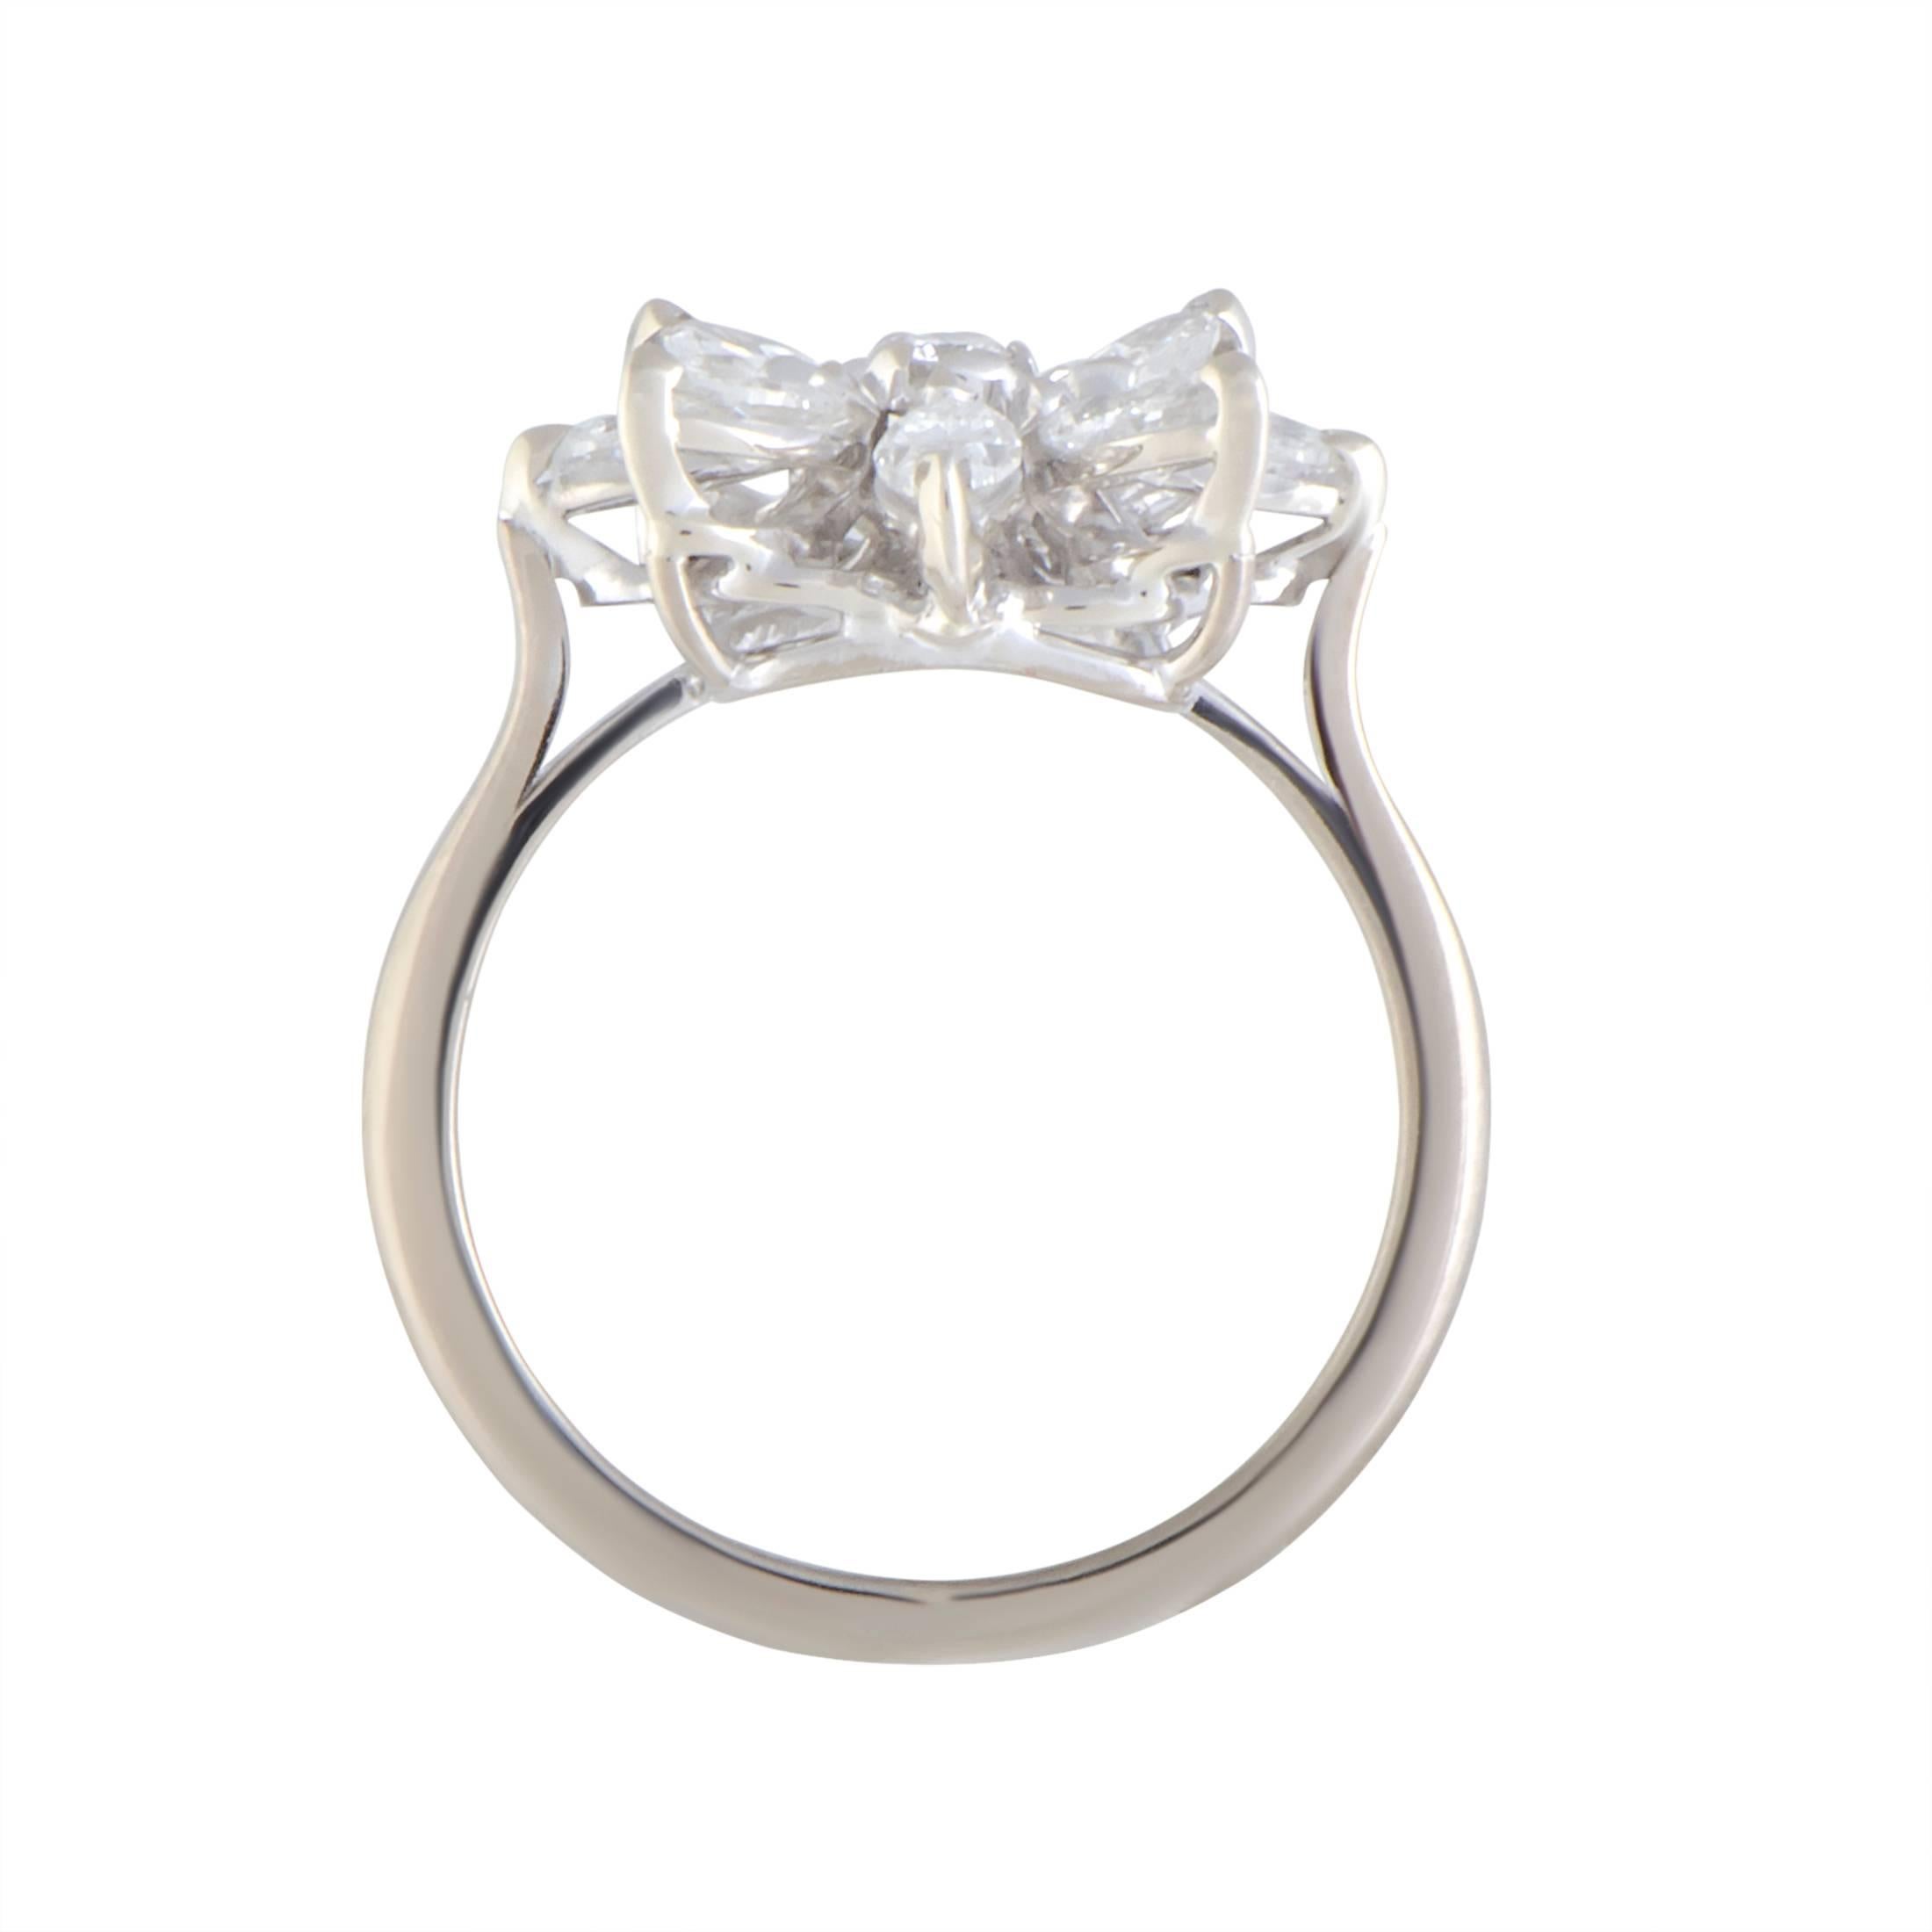 Exquisitely cut and brilliantly arranged to tantalizingly resemble a delicate flower enriched with prestigious glisten, the glorious diamonds amounting to 1.00 carat are proudly presented upon this truly fascinating 18K white gold ring from